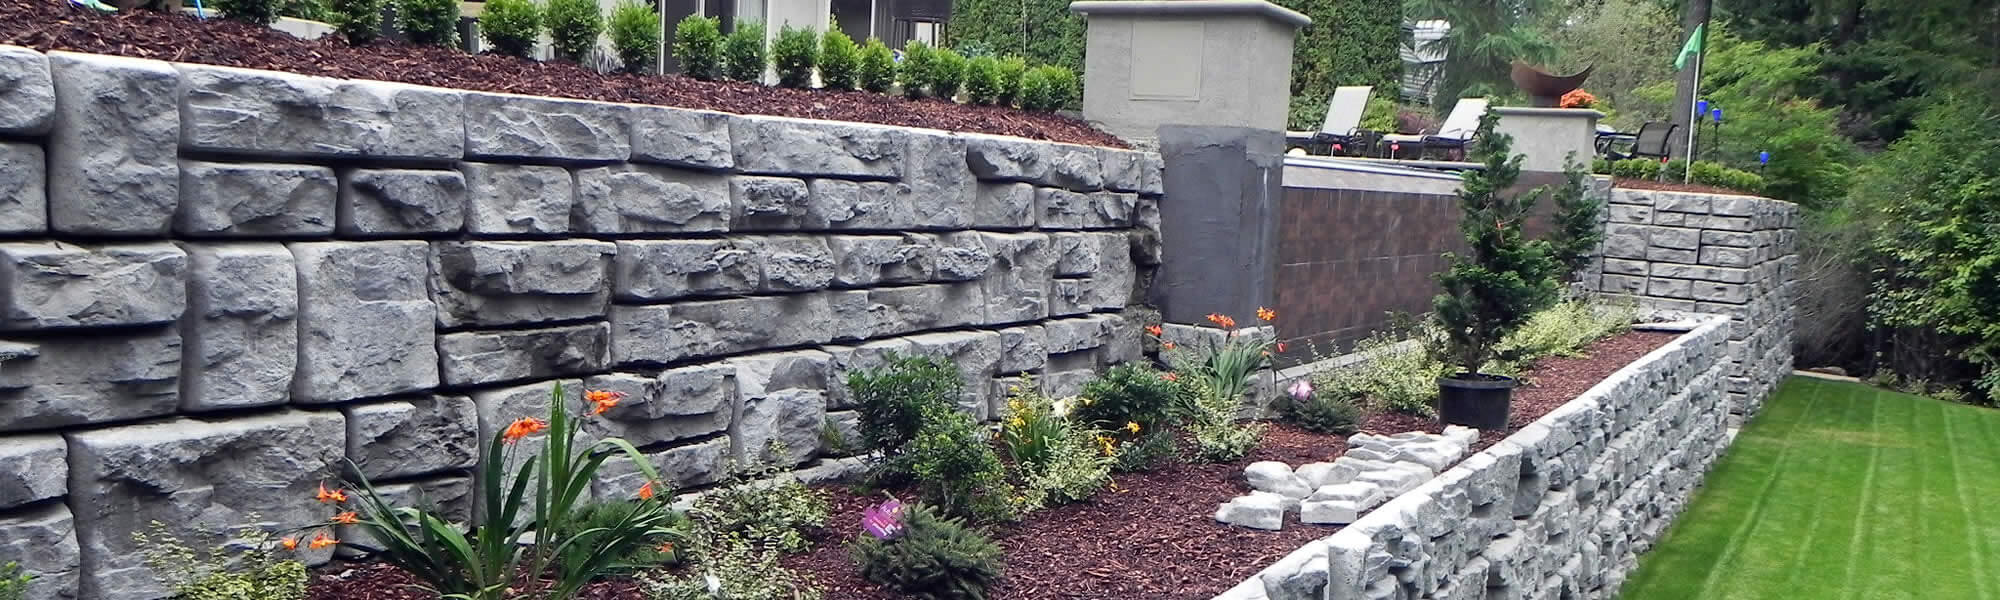 Retaining Wall Construction Services